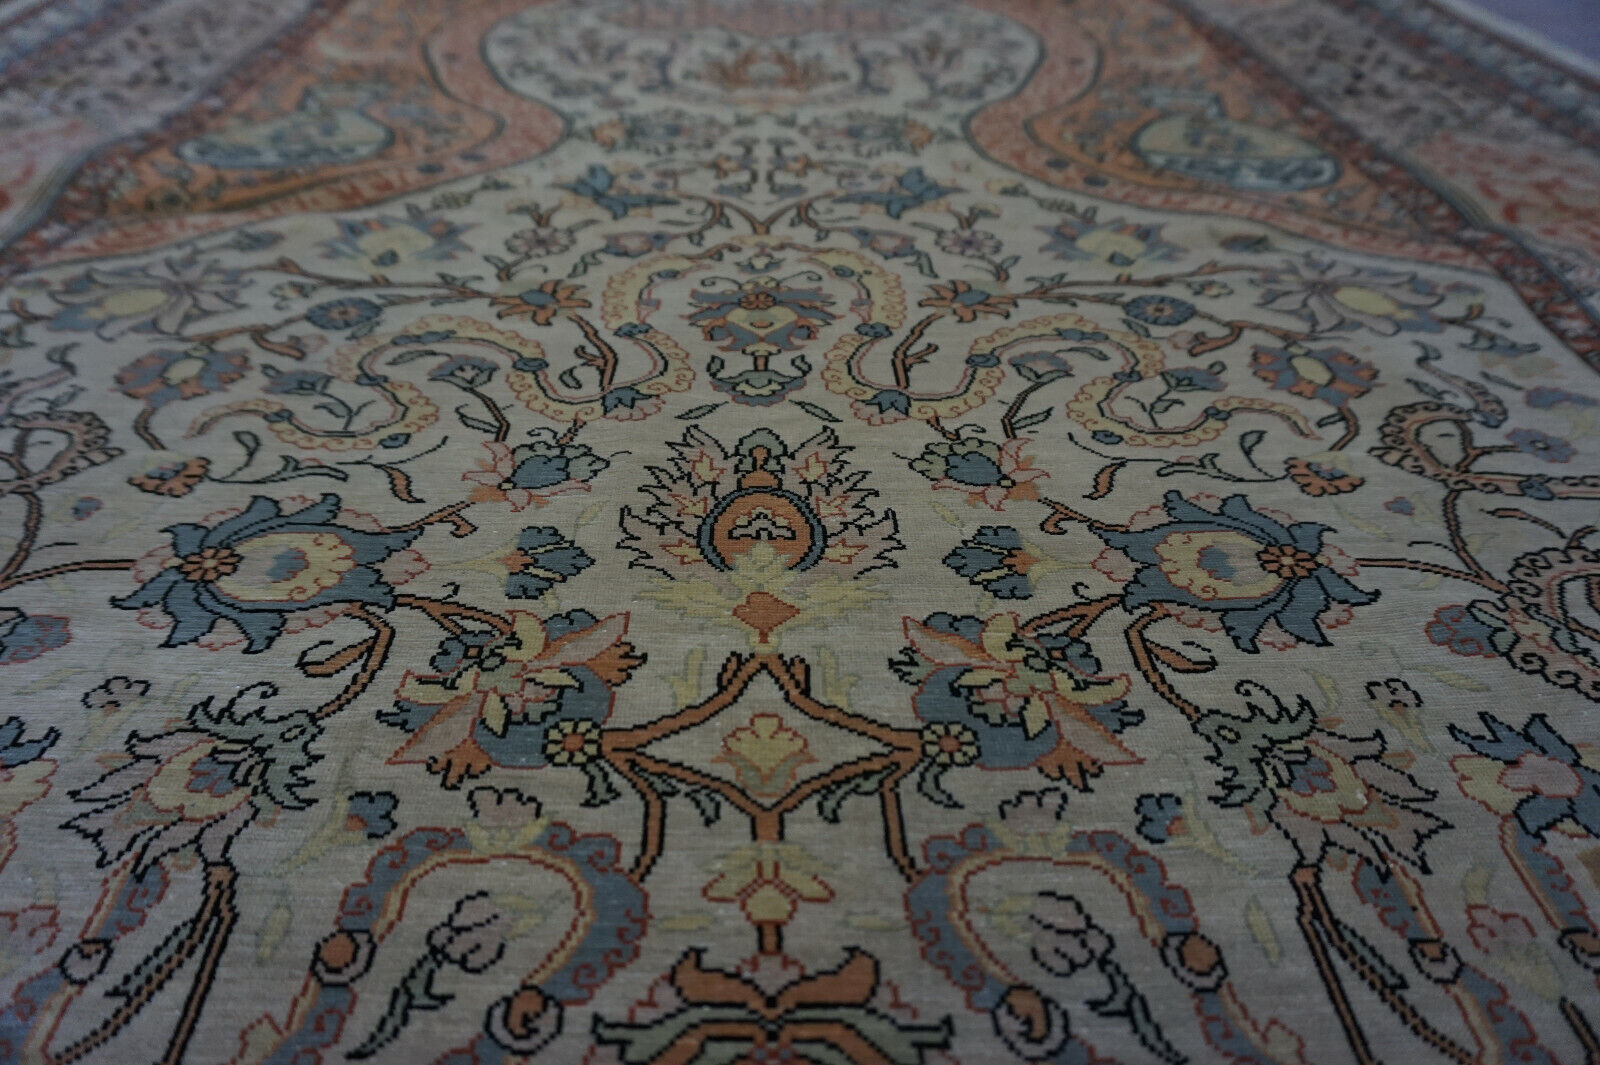 Close-up of the intricate patterns and symbols on the Handmade Vintage Turkish Hereke Silk Rug